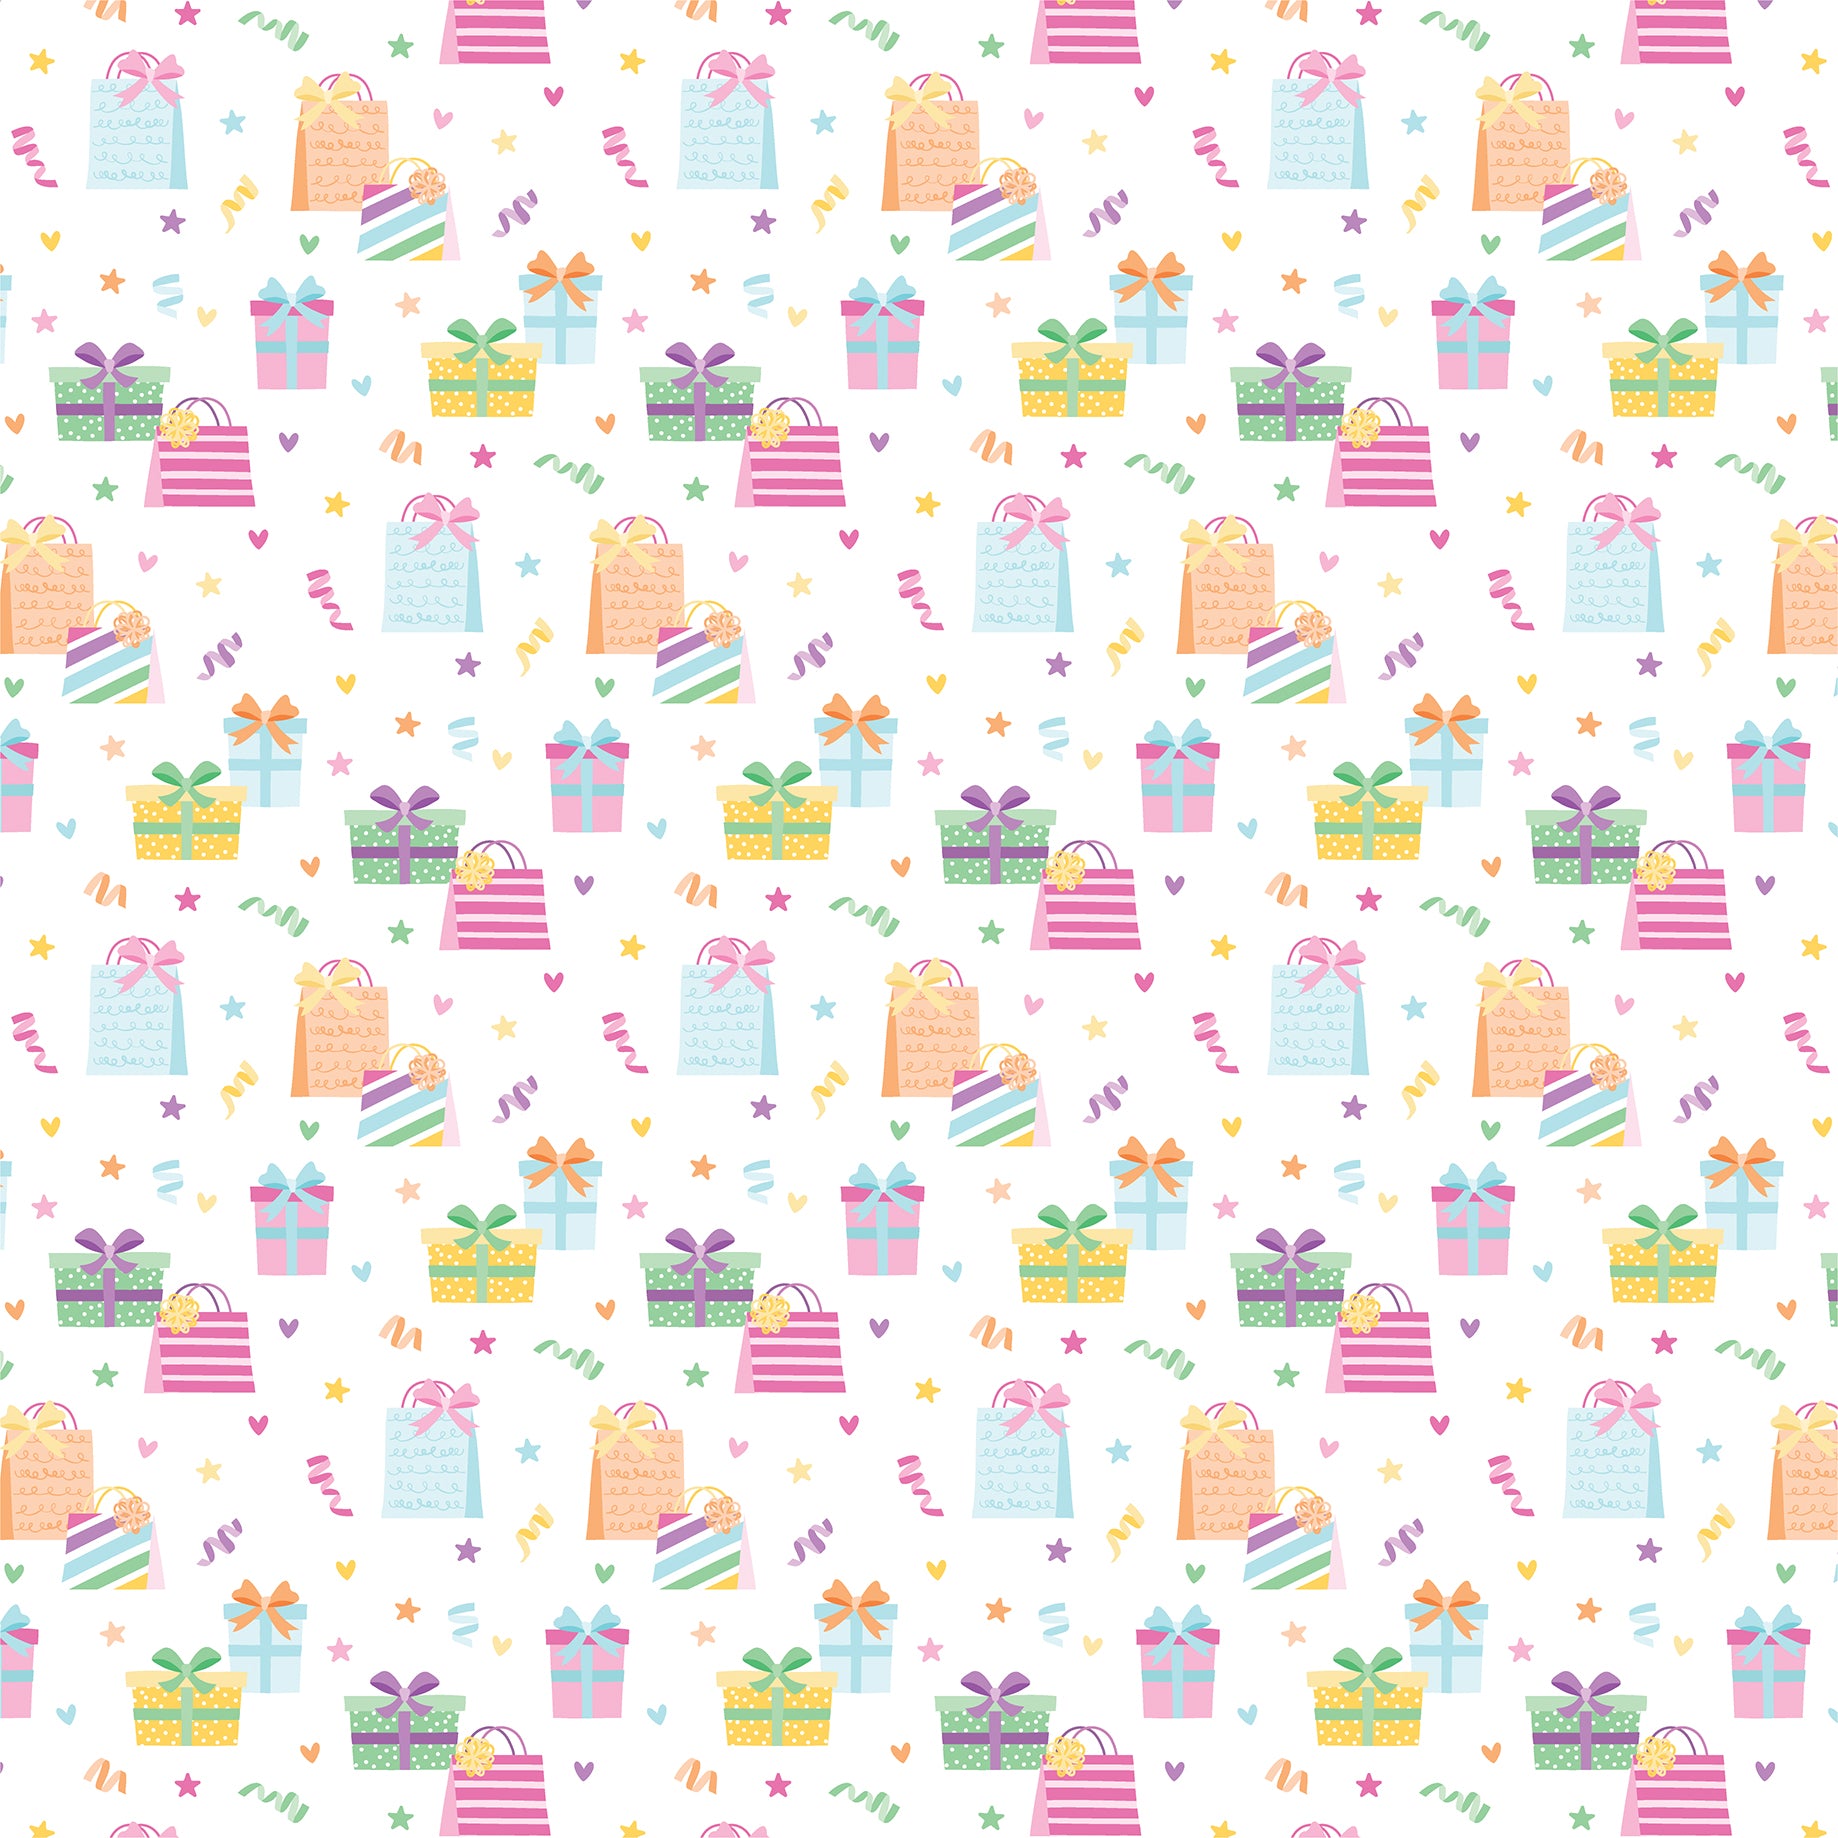 Make a Wish Birthday Girl Collection Sweet Birthday Gifts 12 x 12 Double-Sided Scrapbook Paper by Echo Park Paper